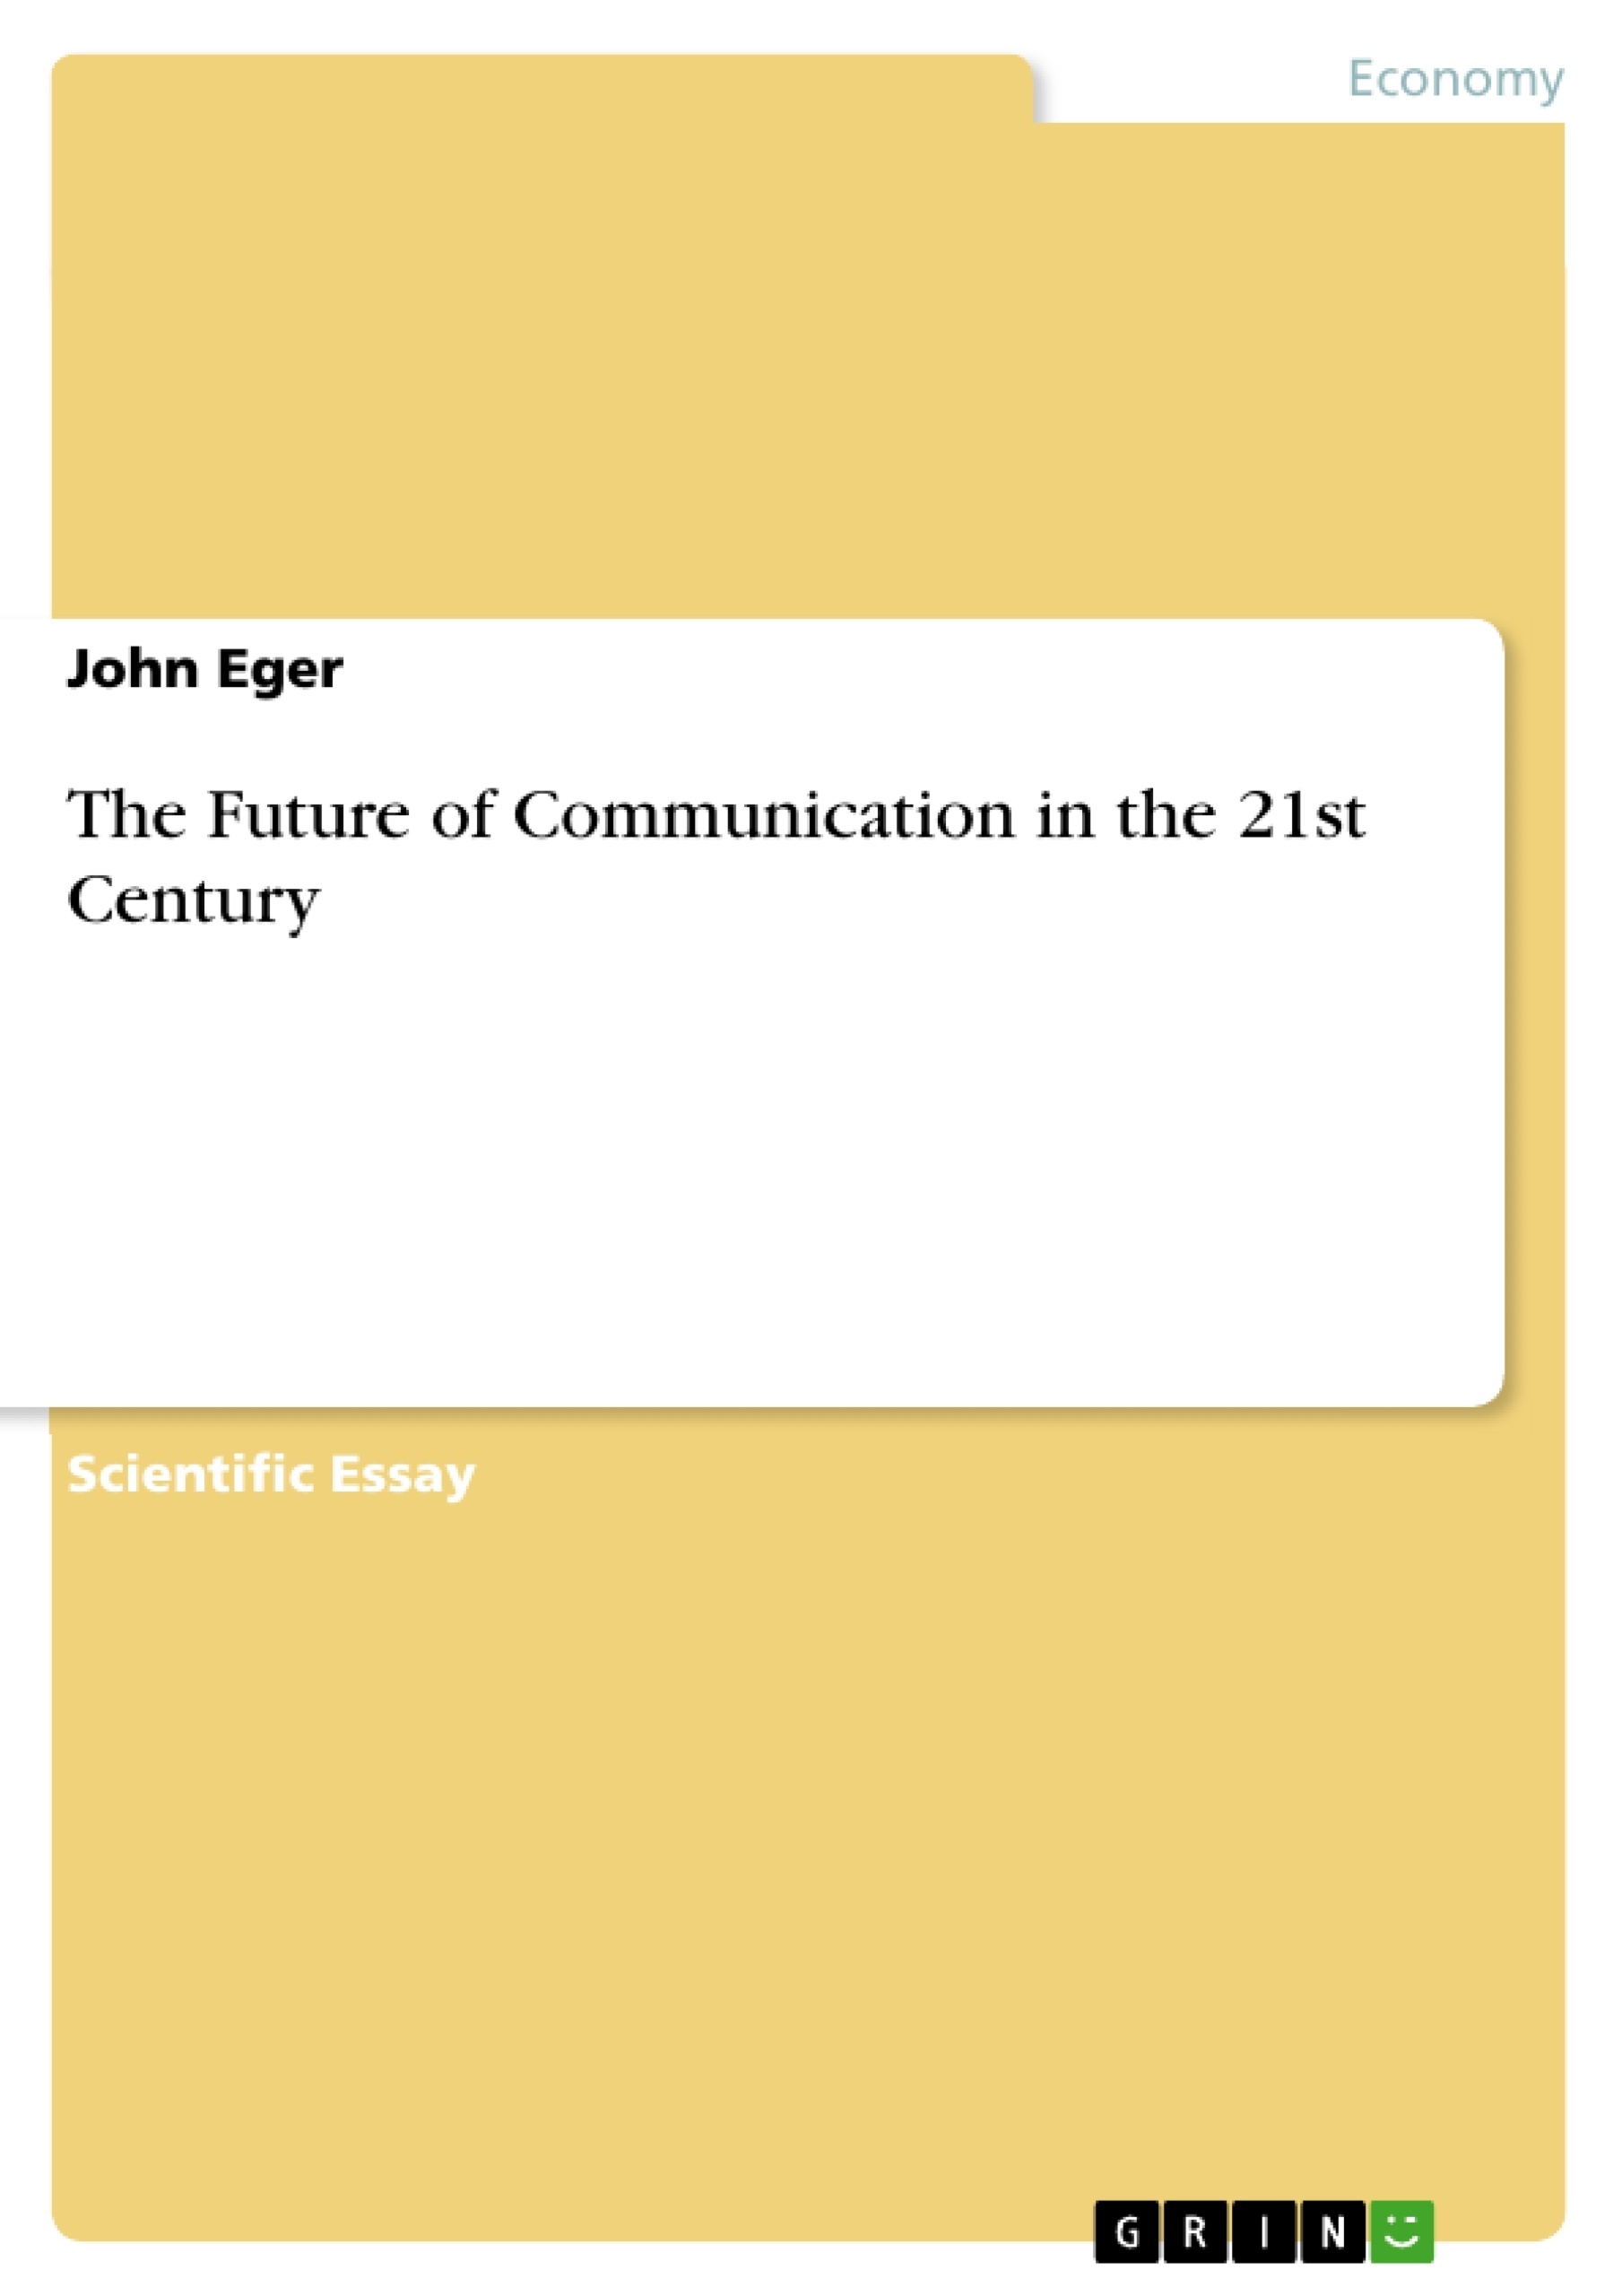 Title: The Future of Communication in the 21st Century